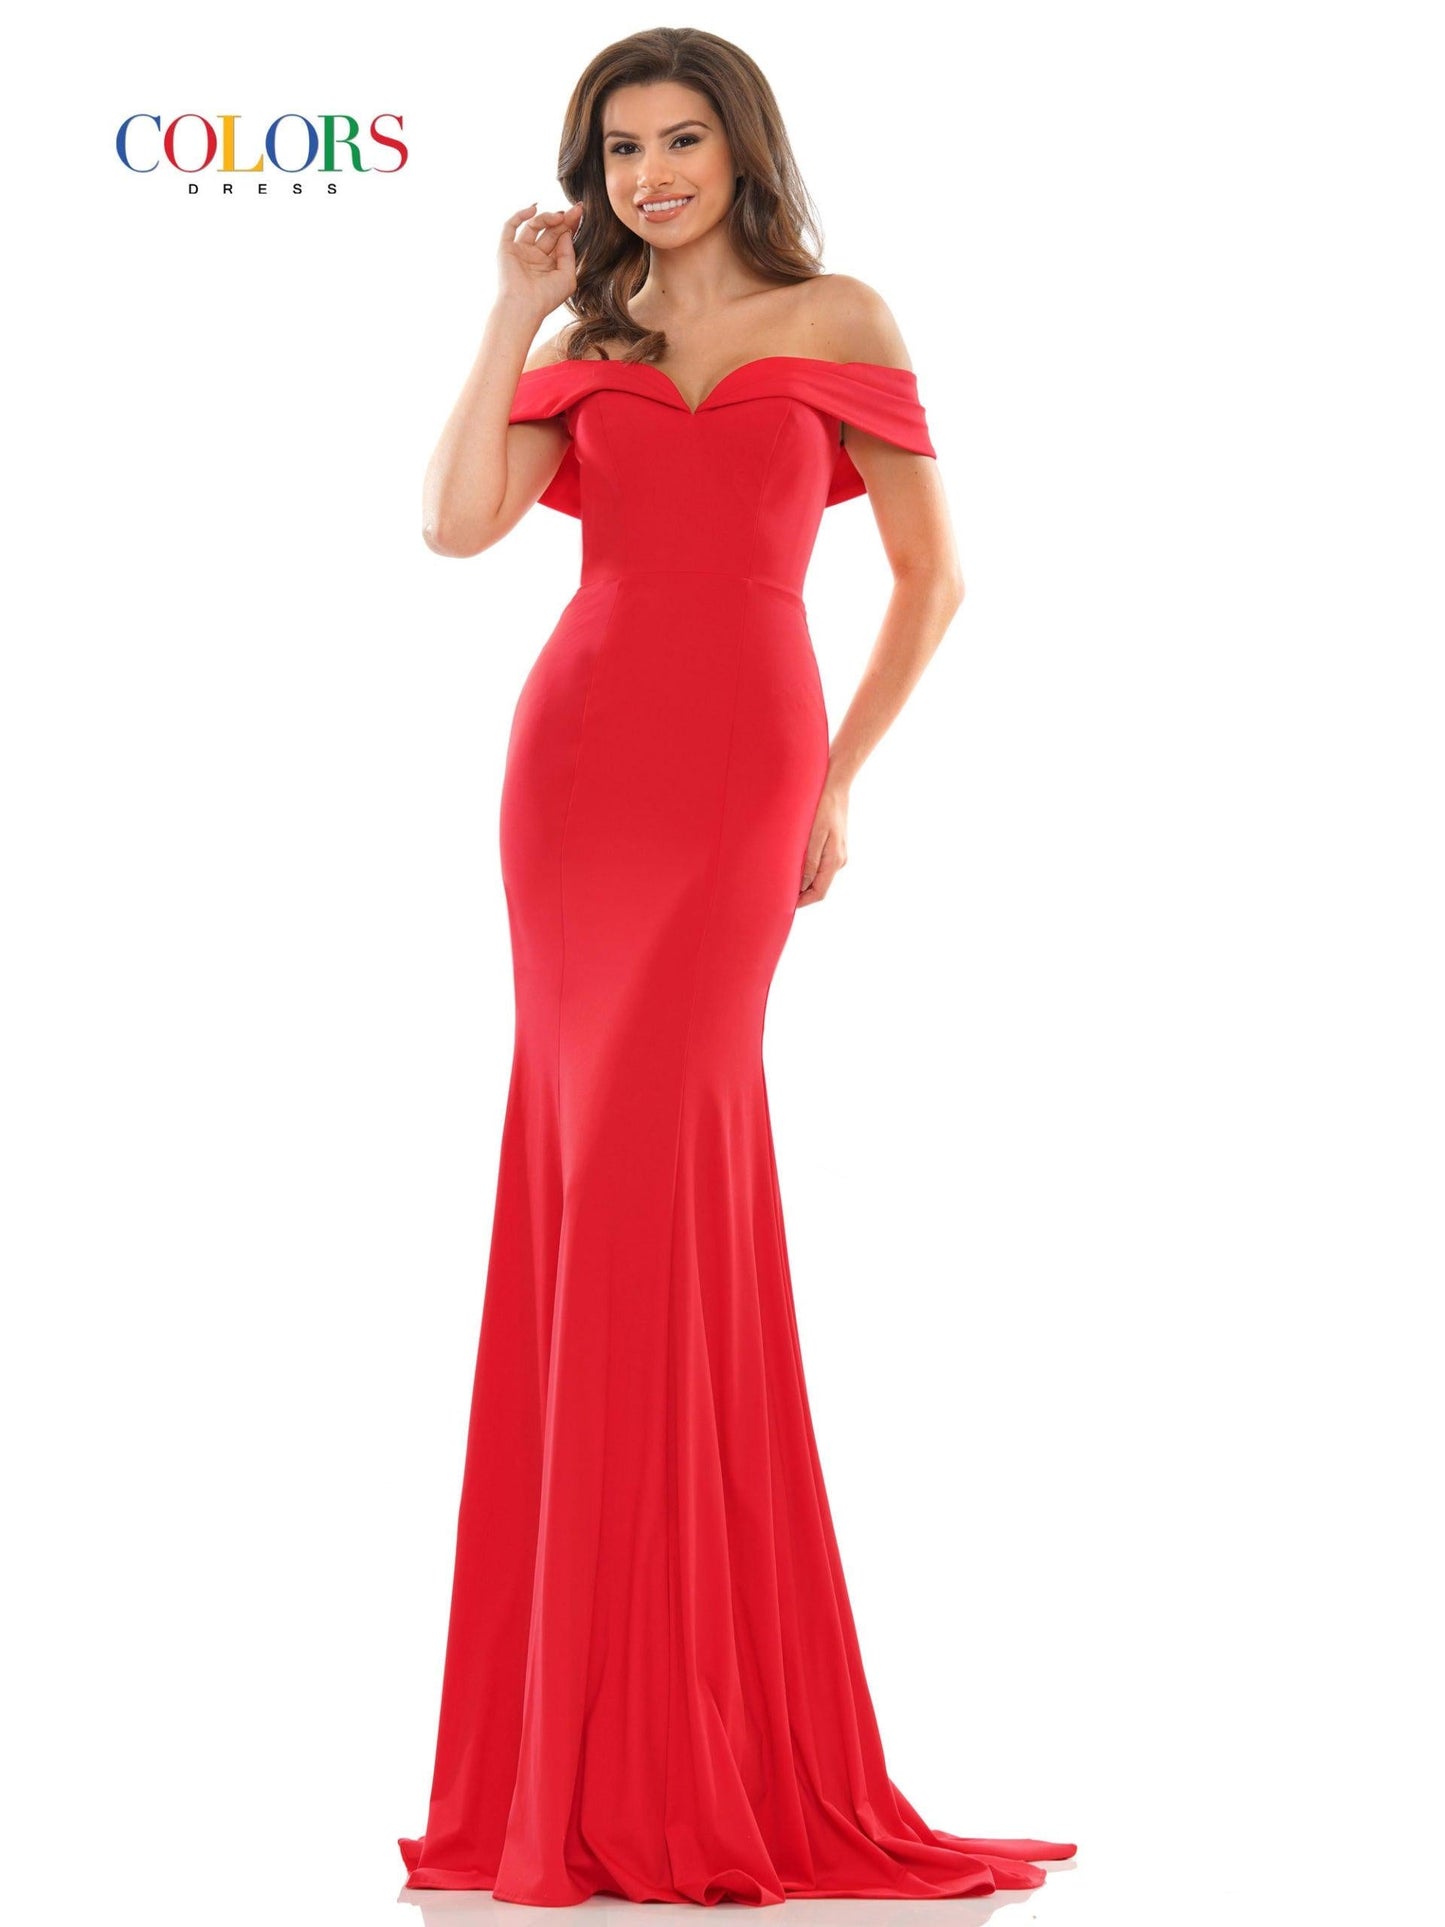 Colors Long Off Shoulder Fitted Prom Dress 2692 - The Dress Outlet